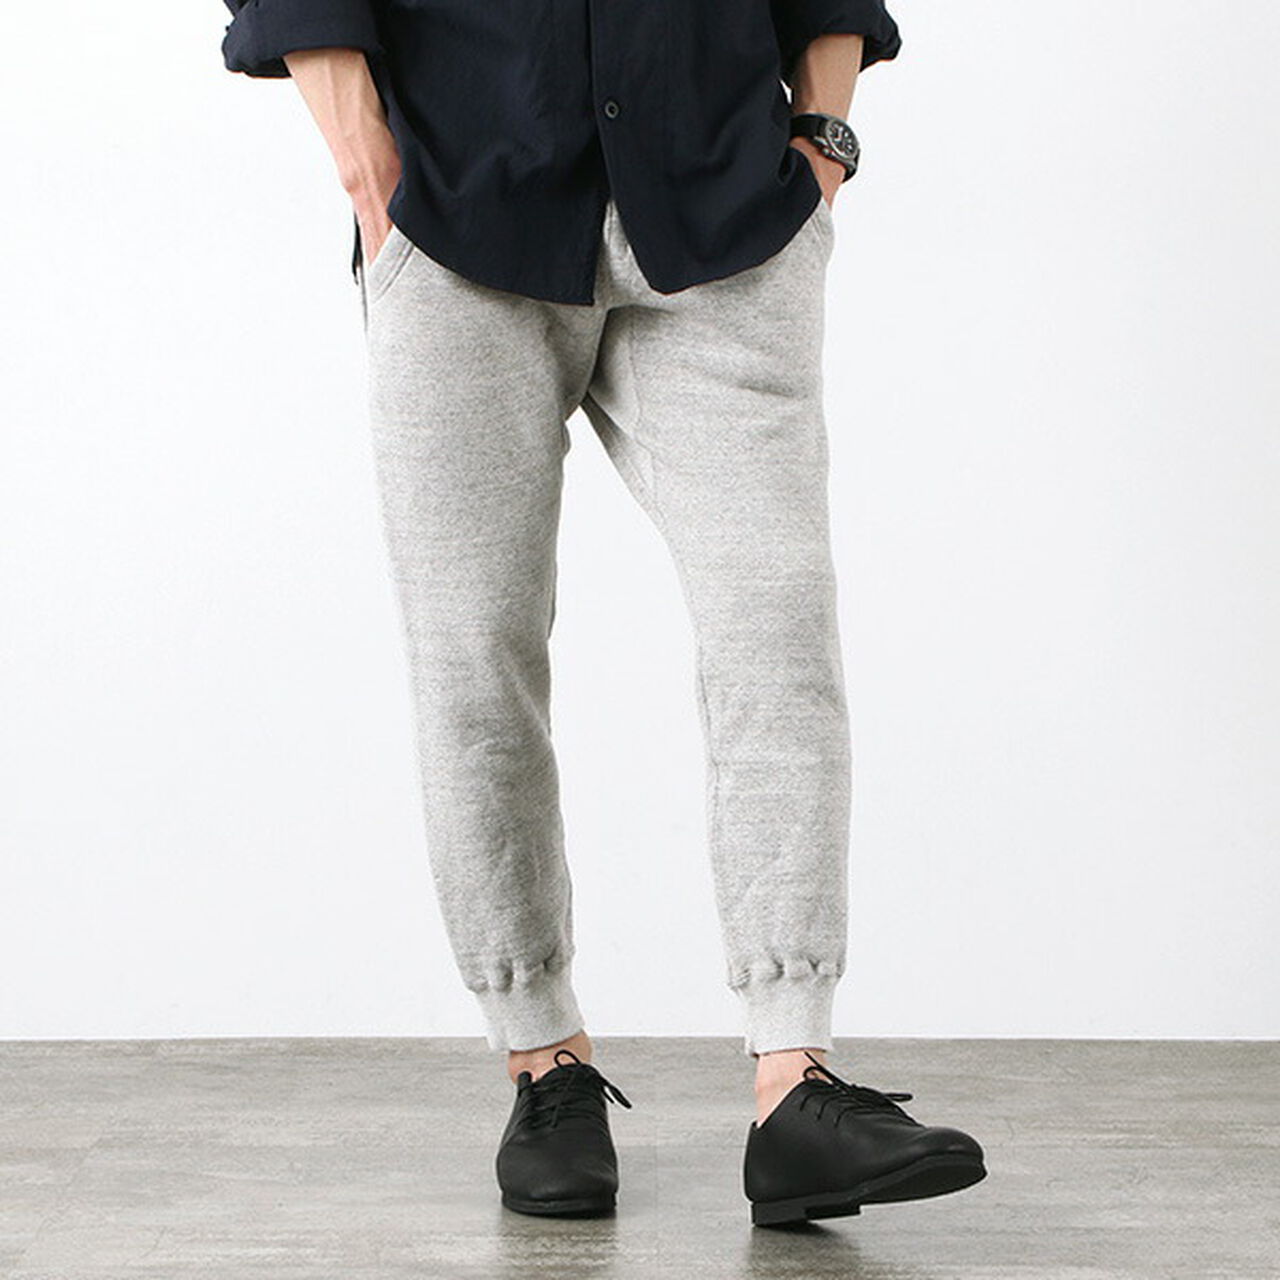 Longbeach Cropped Pants,LightGrey, large image number 0